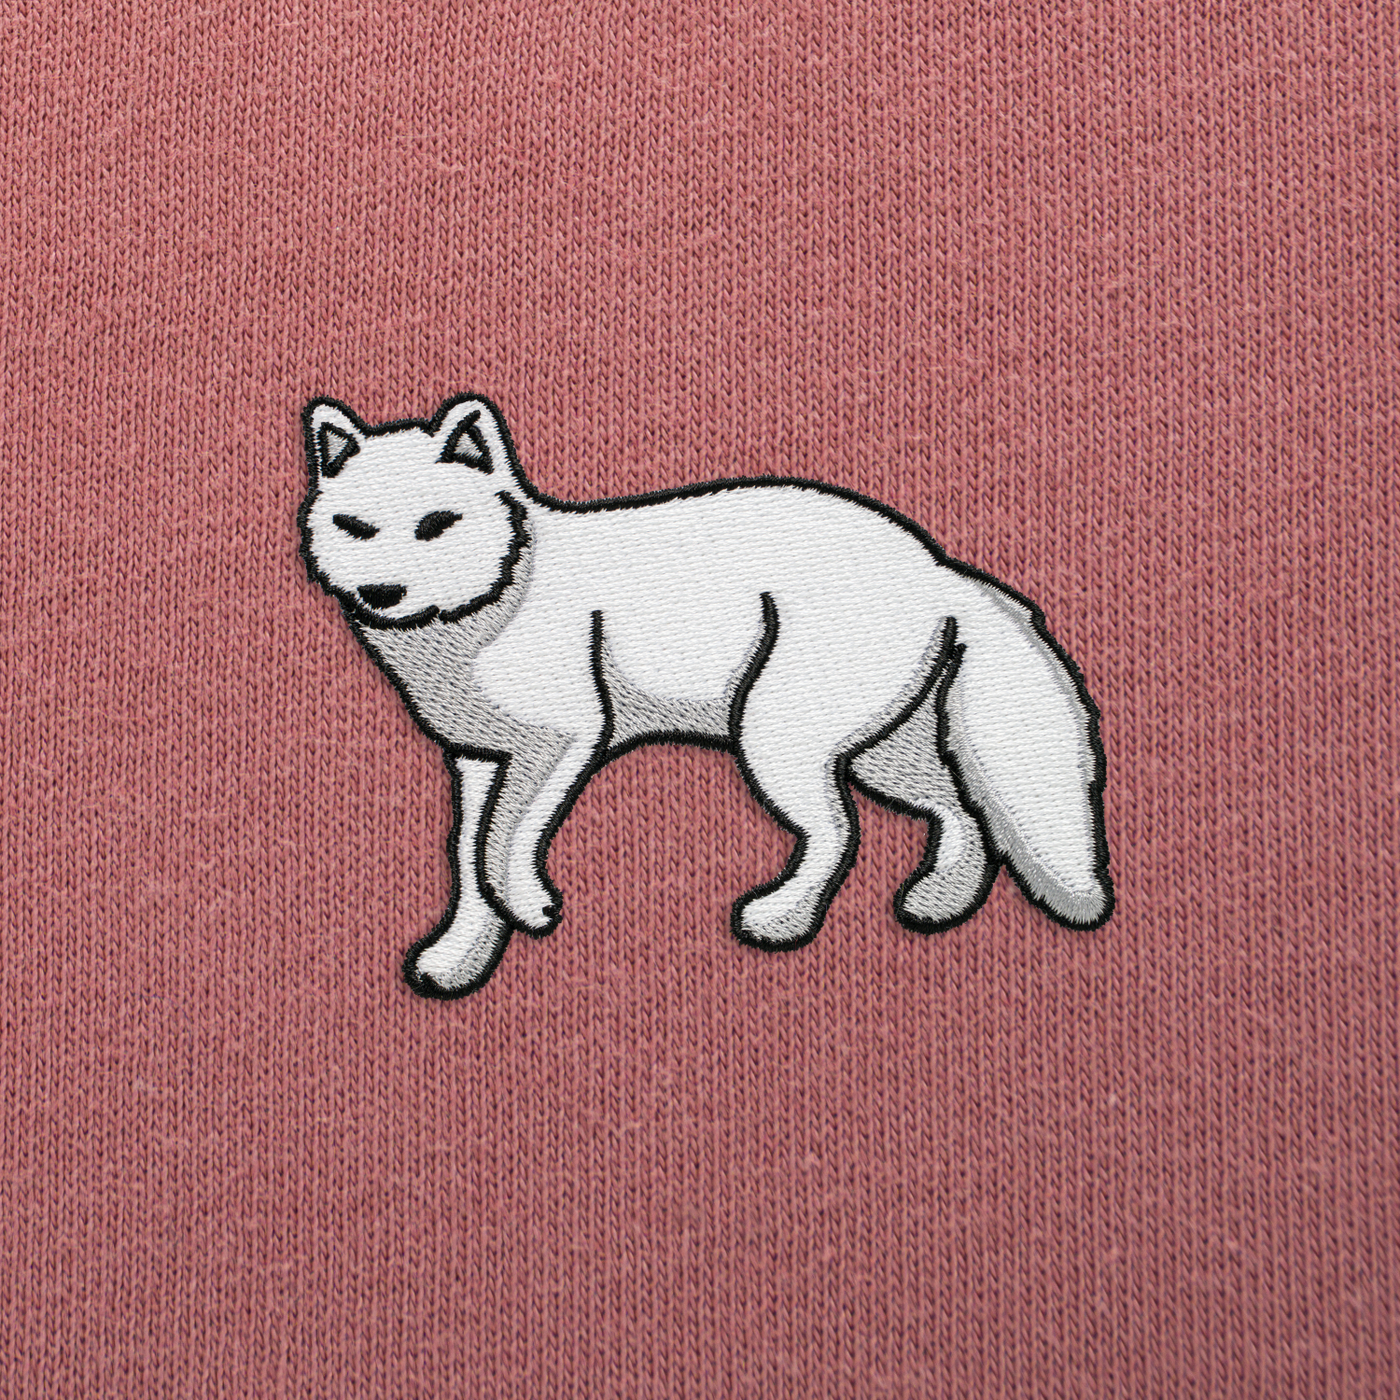 Bobby's Planet Women's Embroidered Arctic Fox T-Shirt from Arctic Polar Animals Collection in Mauve Color#color_mauve